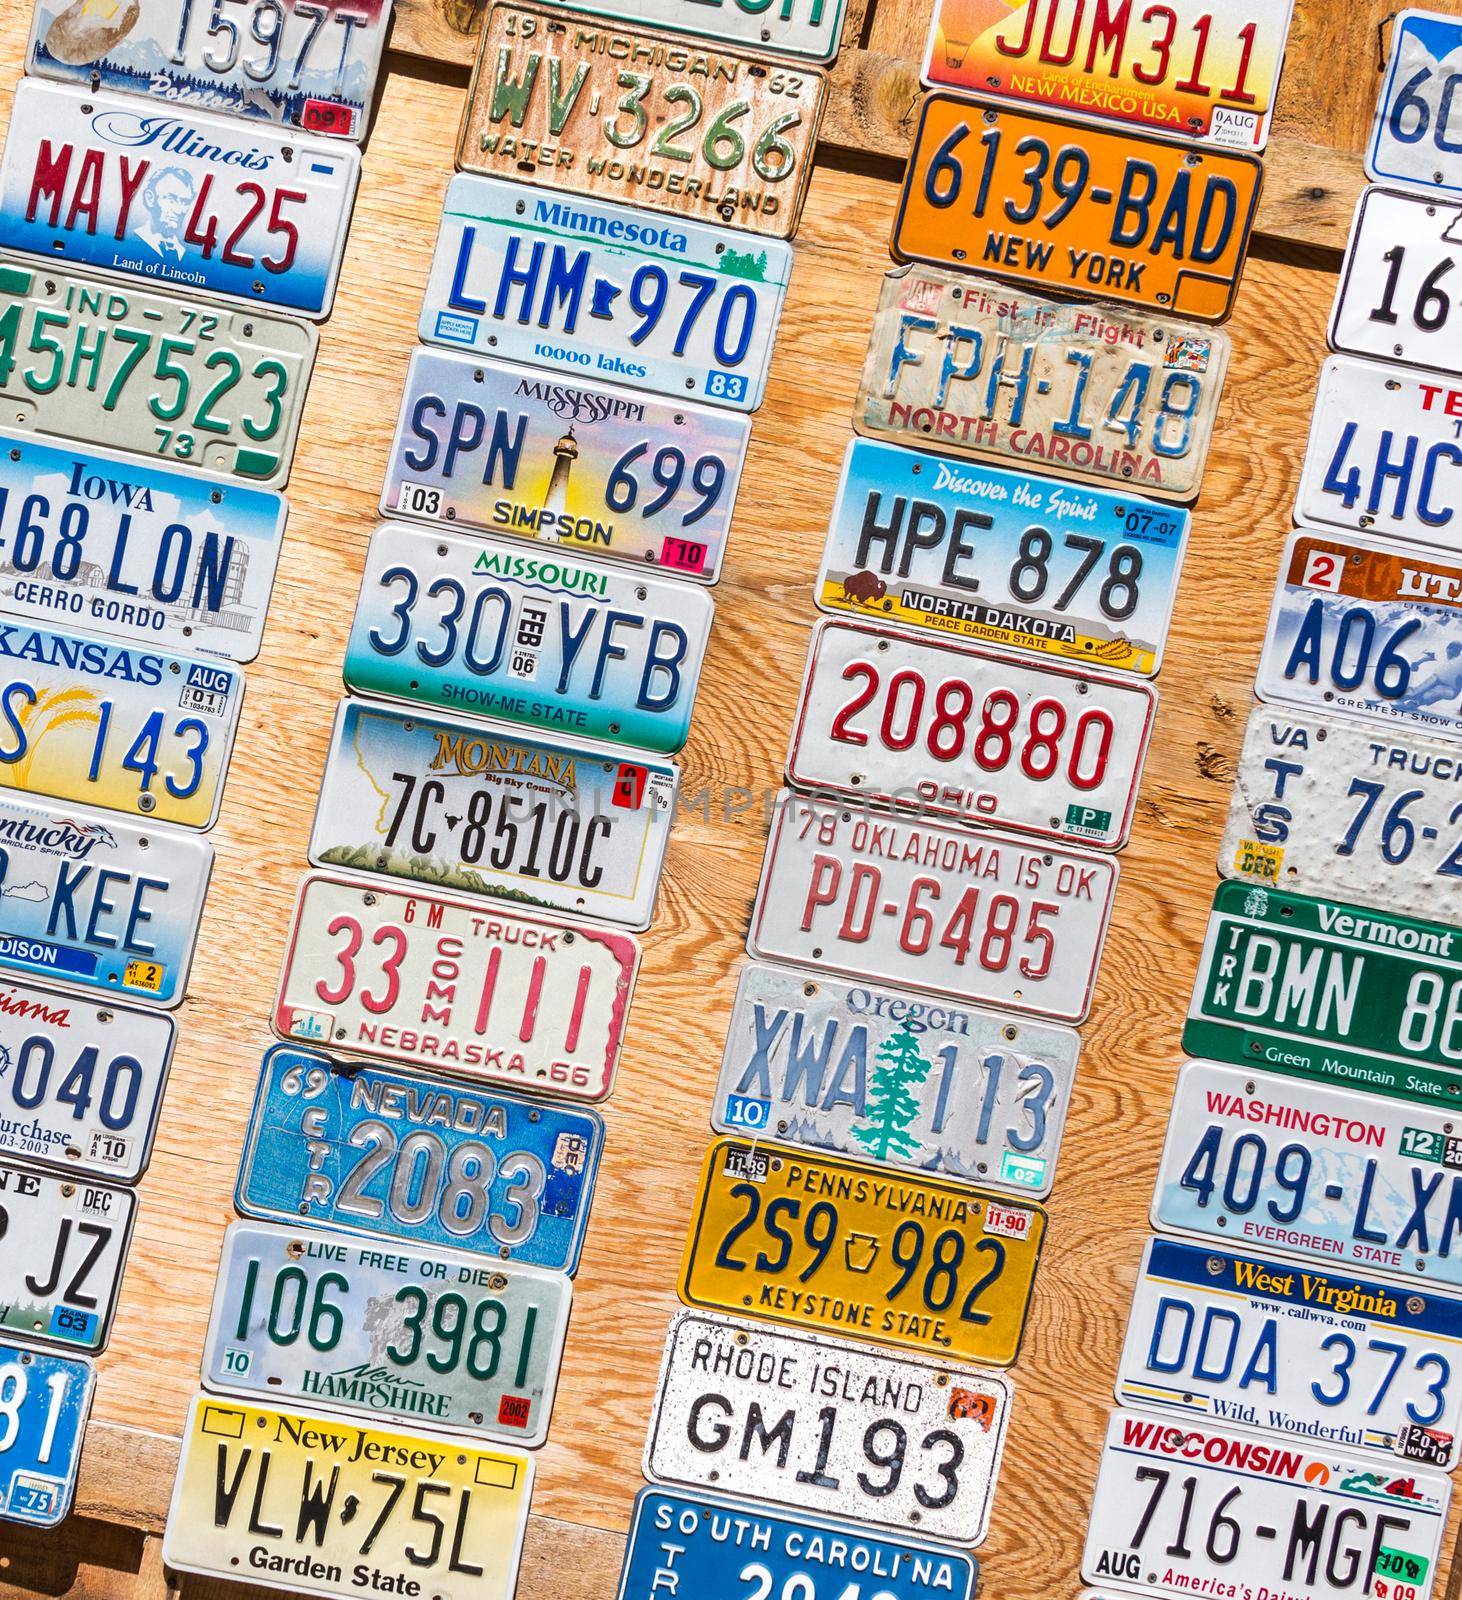 KANAB, UTAH, USA - MAY 25, 2015: License Plates Collage in public place on a street in Kanab Utah USA by Mariakray